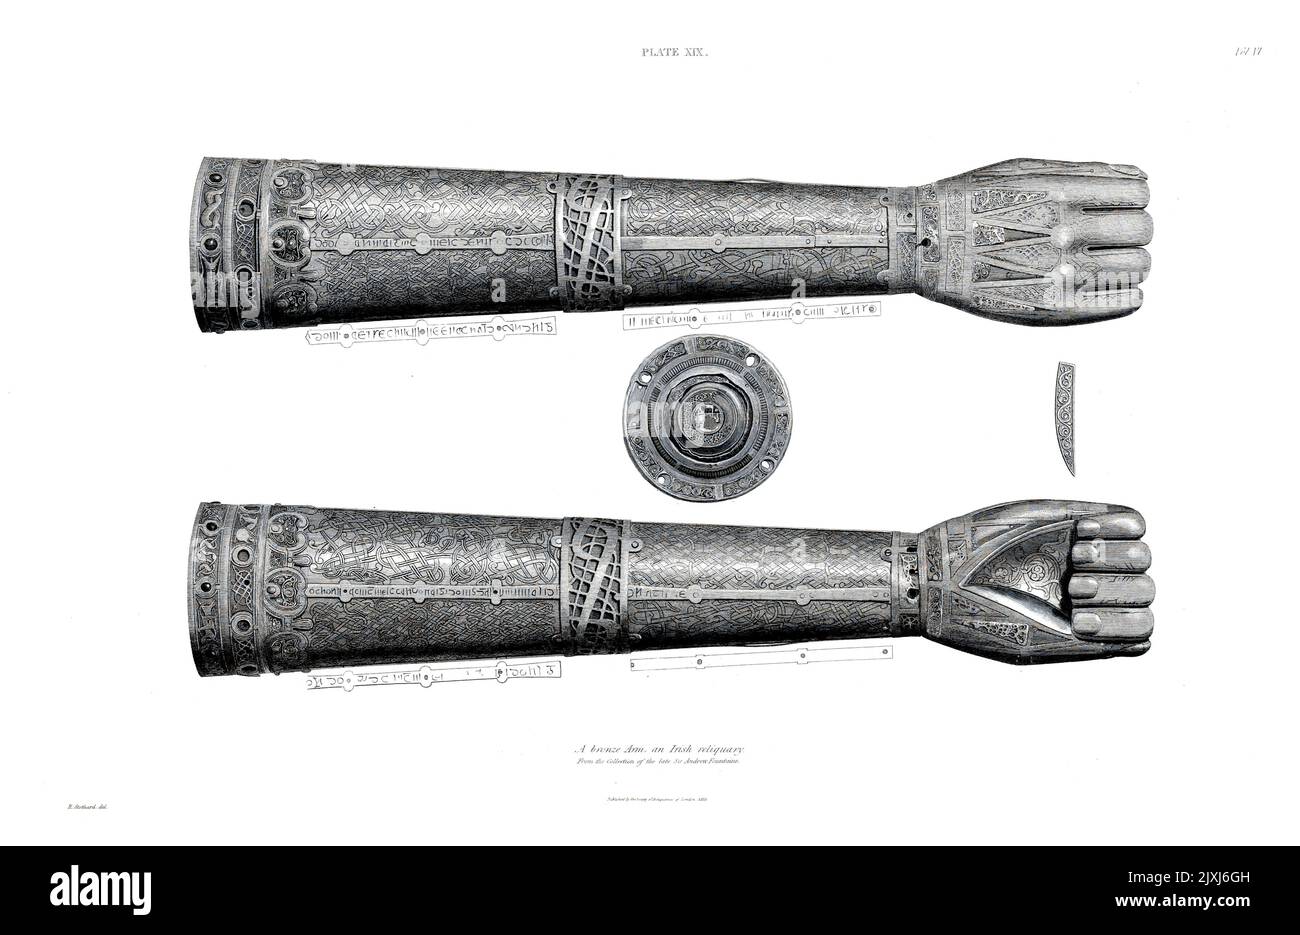 Description of a Bronze Arm, an Irish Reliquary, from the Collection of the late Sir Andrew Fountaine. It is engraved to the full size of the original ; and is of brass or bronze, the hand, which is riveted to the arm at the wrist, being inlaid, in the nails, the palm, and at the back, and round the wrist, with silver. The upper end of the arm is also ornamented with the same metal, and with a row of bluish-grey stones resembling the calcedony, and there appears to have been a second row of stones above the other. Riveted across the centre of the arm is a broad band with knots in relief ; and Stock Photo